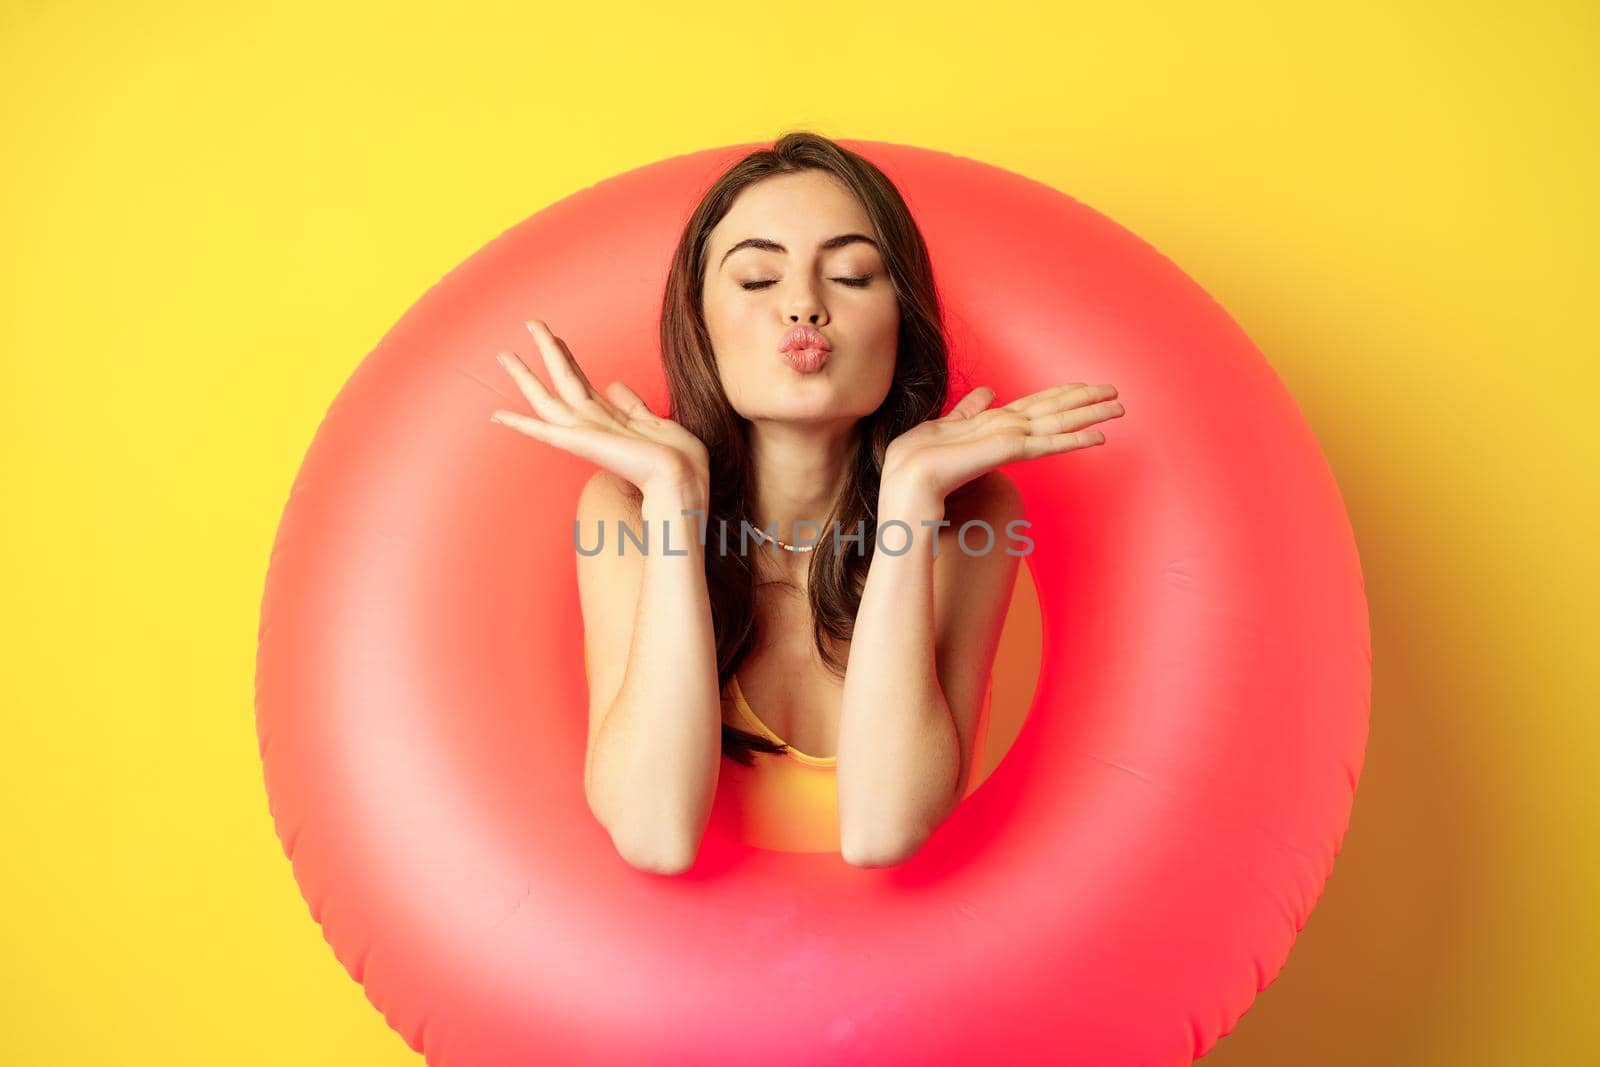 Beautiful coquettish woman inside pink swimming ring, posing on summer vacation, beach holiday concept, standing against yellow background.